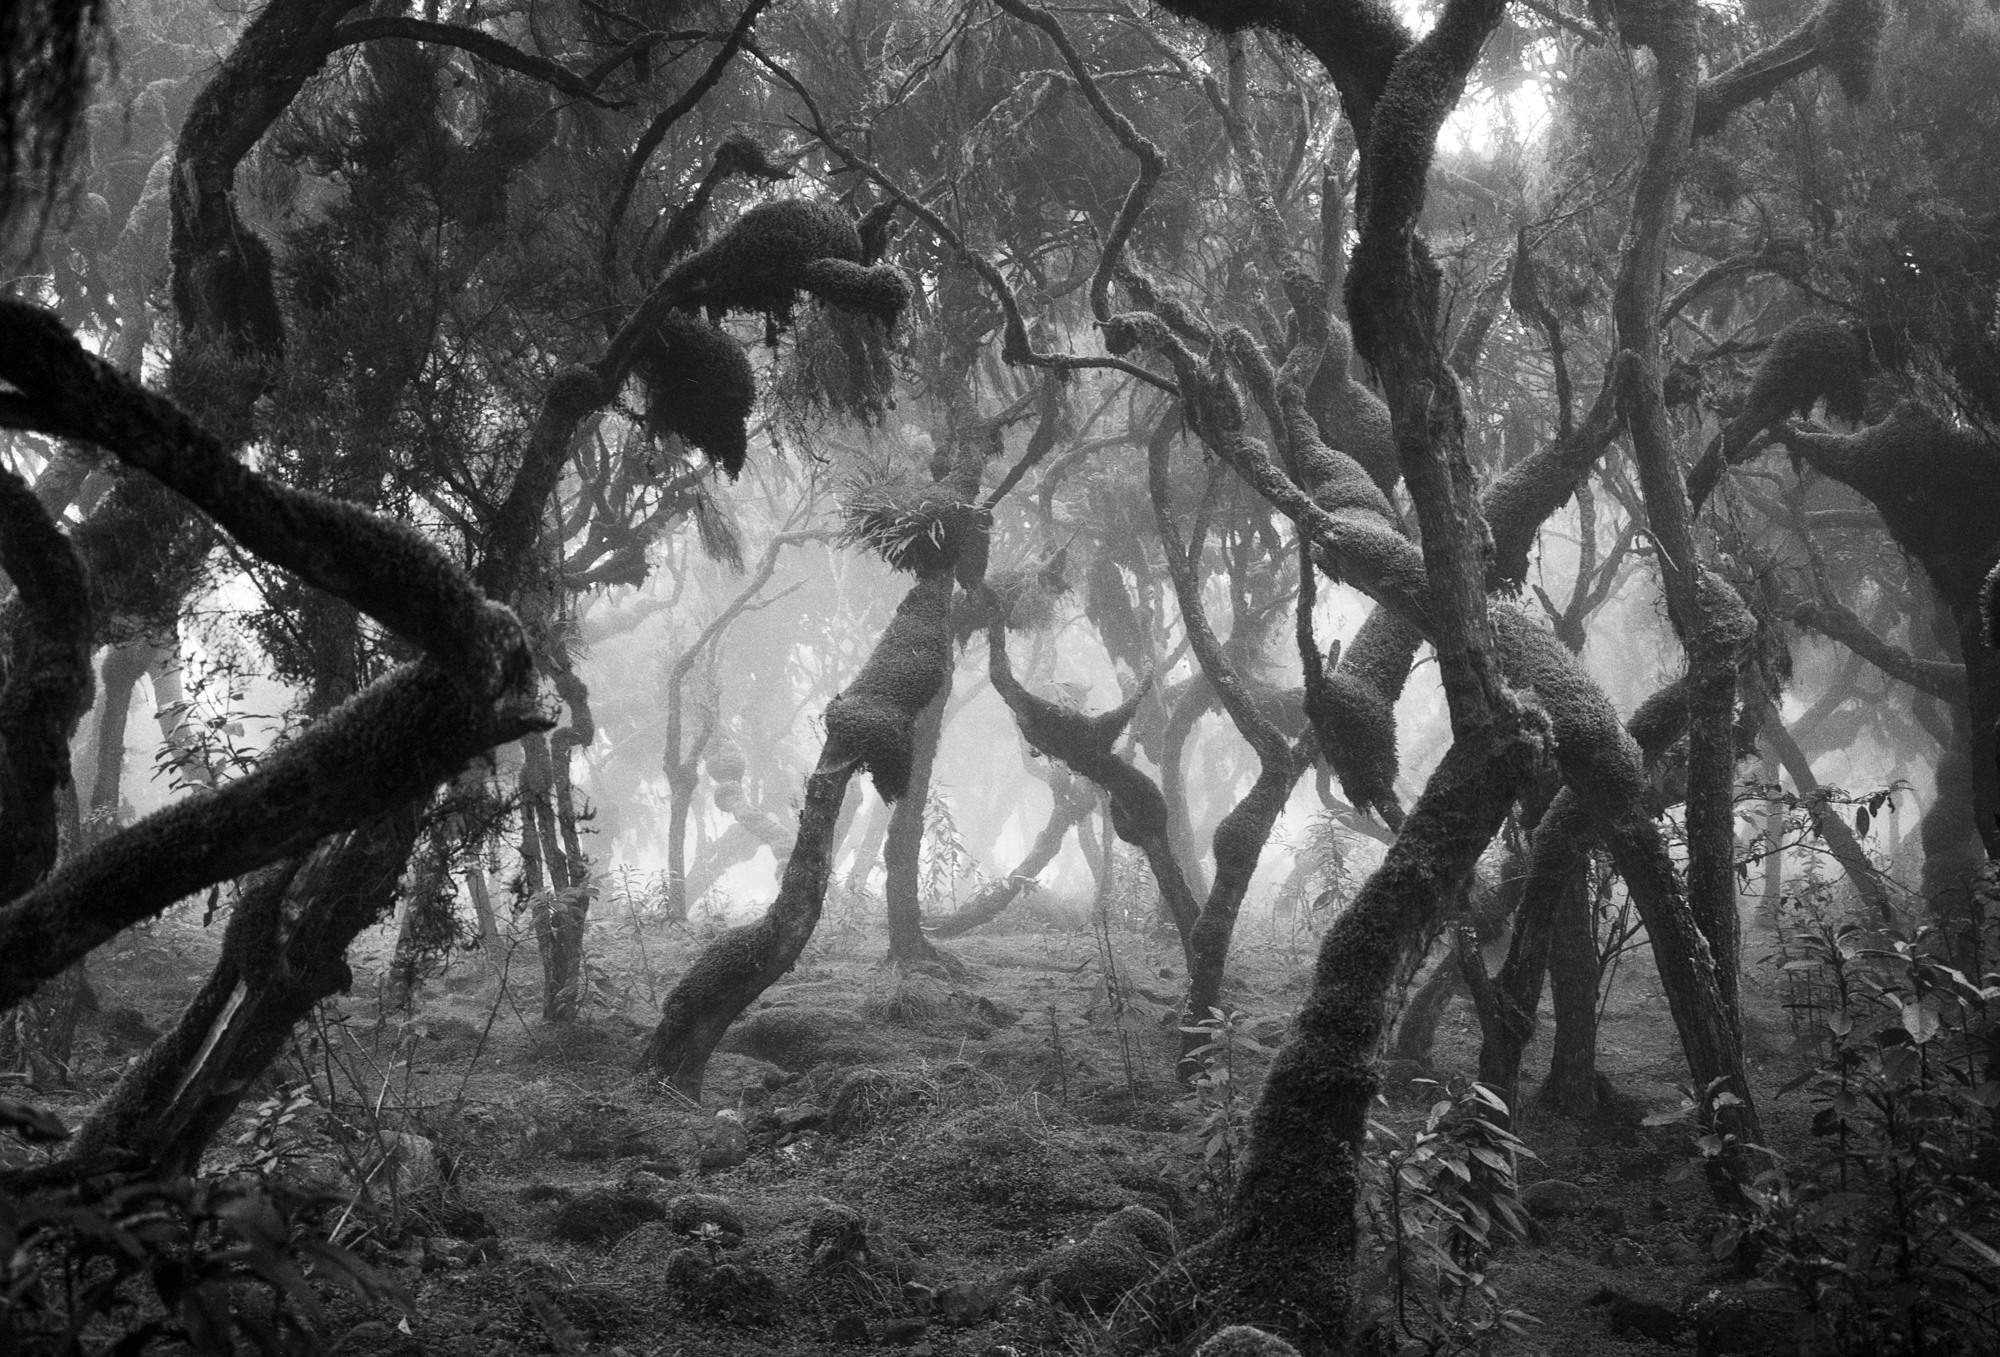 Black & white film photograph by Corey hart shot on FP4+ Harenna Forest 01